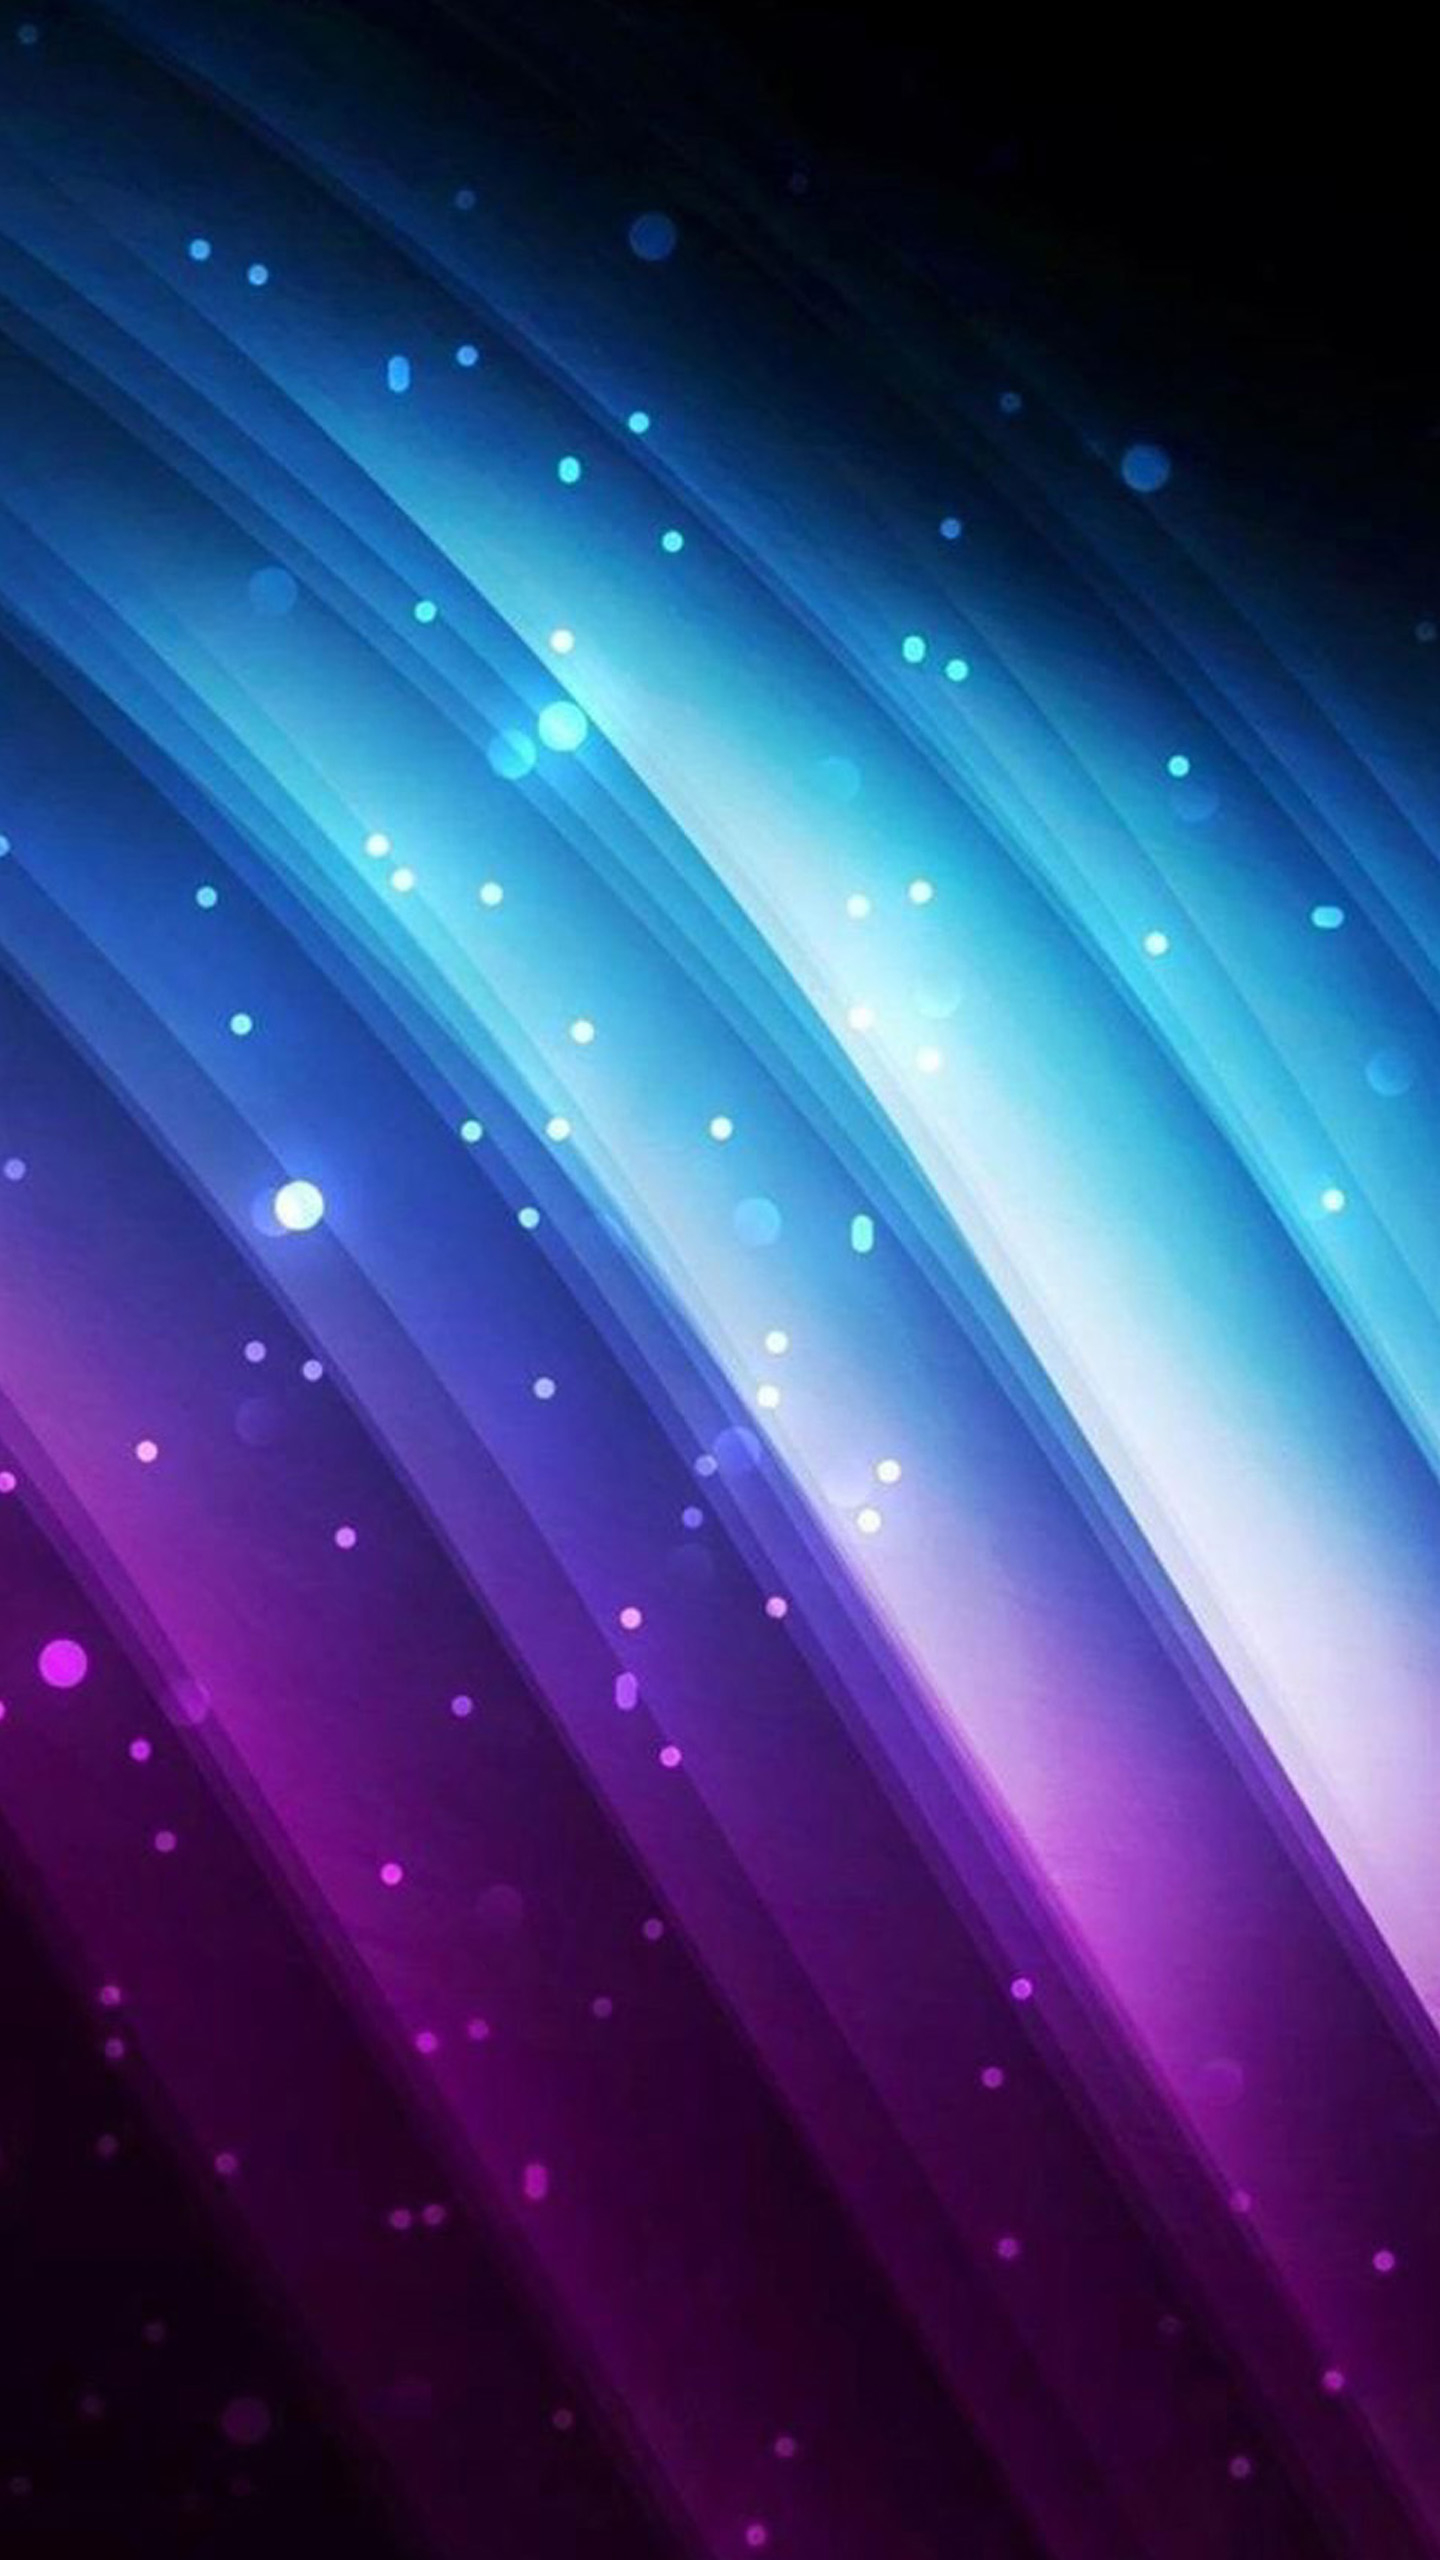 1440x2560 Free download Colorful Samsung Galaxy S6 Wallpaper 88 Galaxy S6 Wallpapers [] for your Desktop, Mobile \u0026 Tablet | Explore 39+ Galaxy S6 Wallpaper | Samsung Galaxy S7 Wallpaper, Samsung Galaxy S6